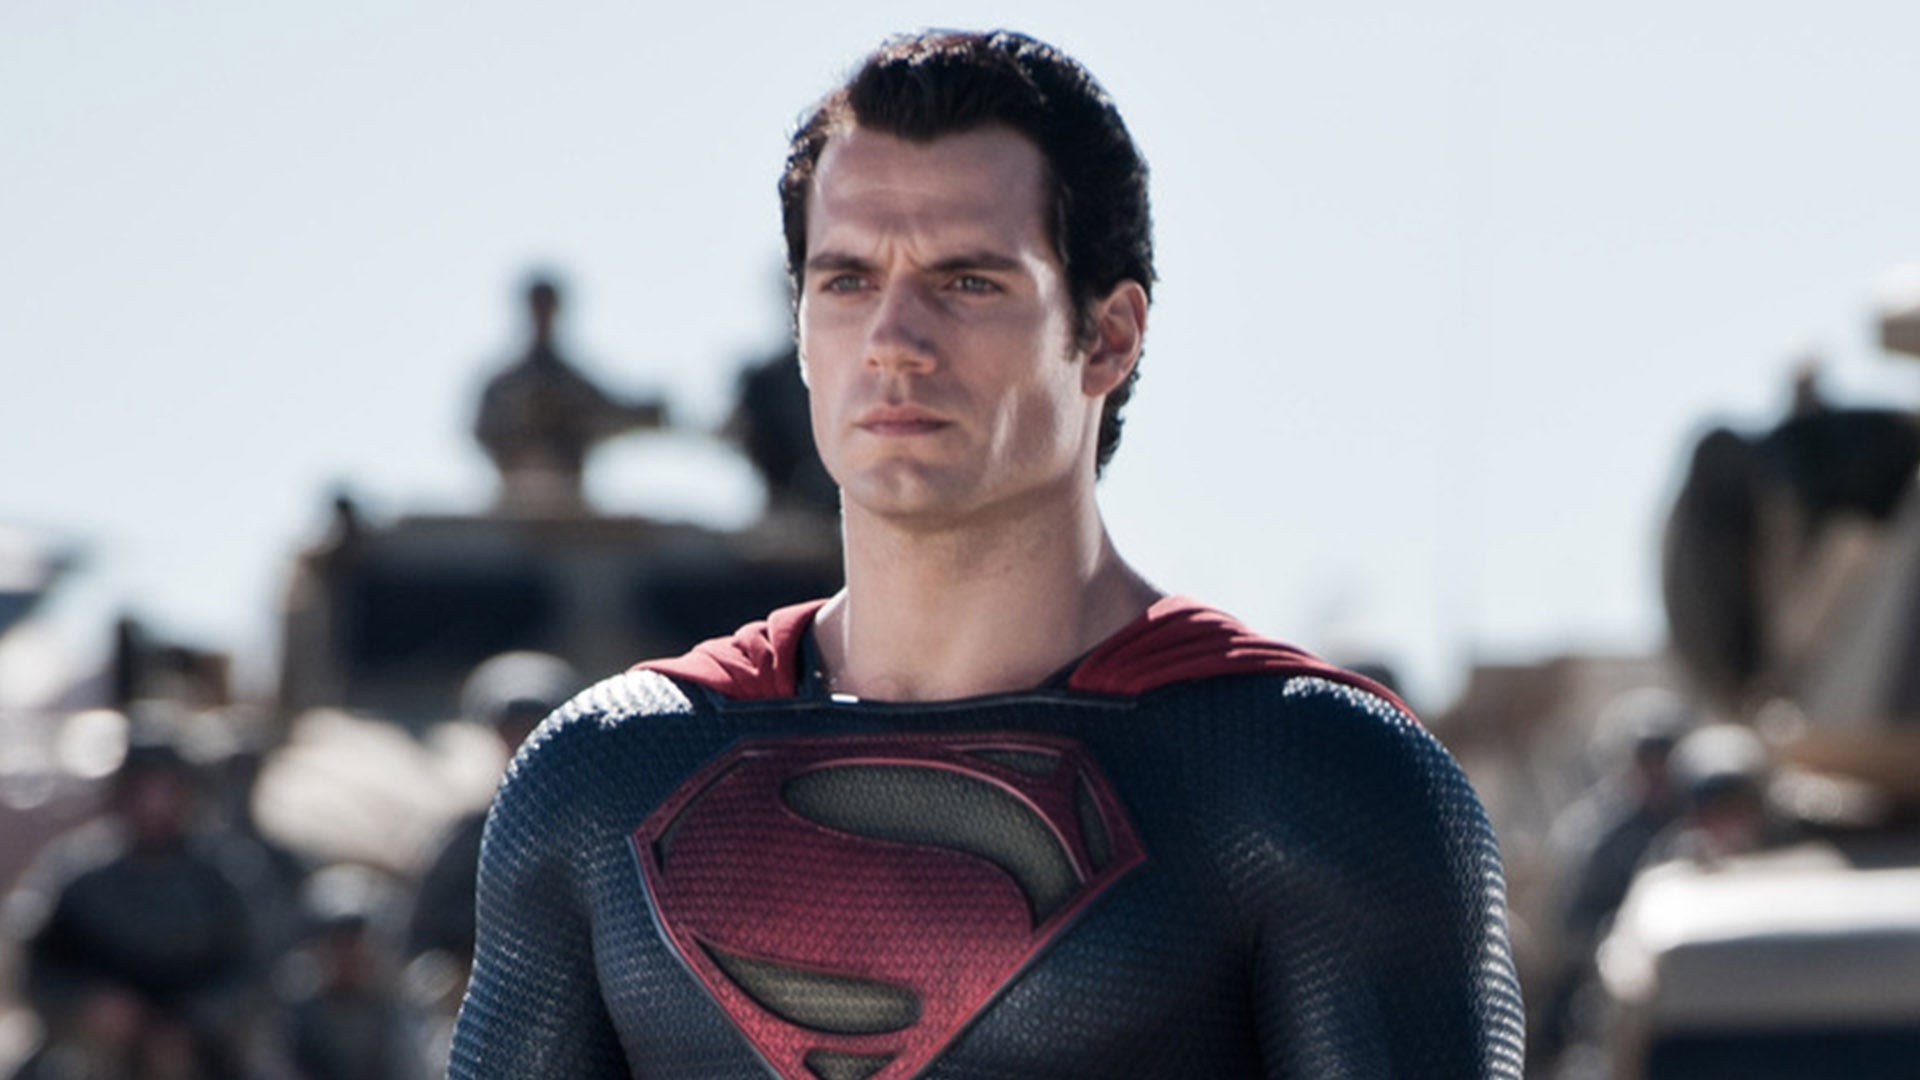 New Superman Movie Without Henry Cavill Officially Announces Release Date &  More